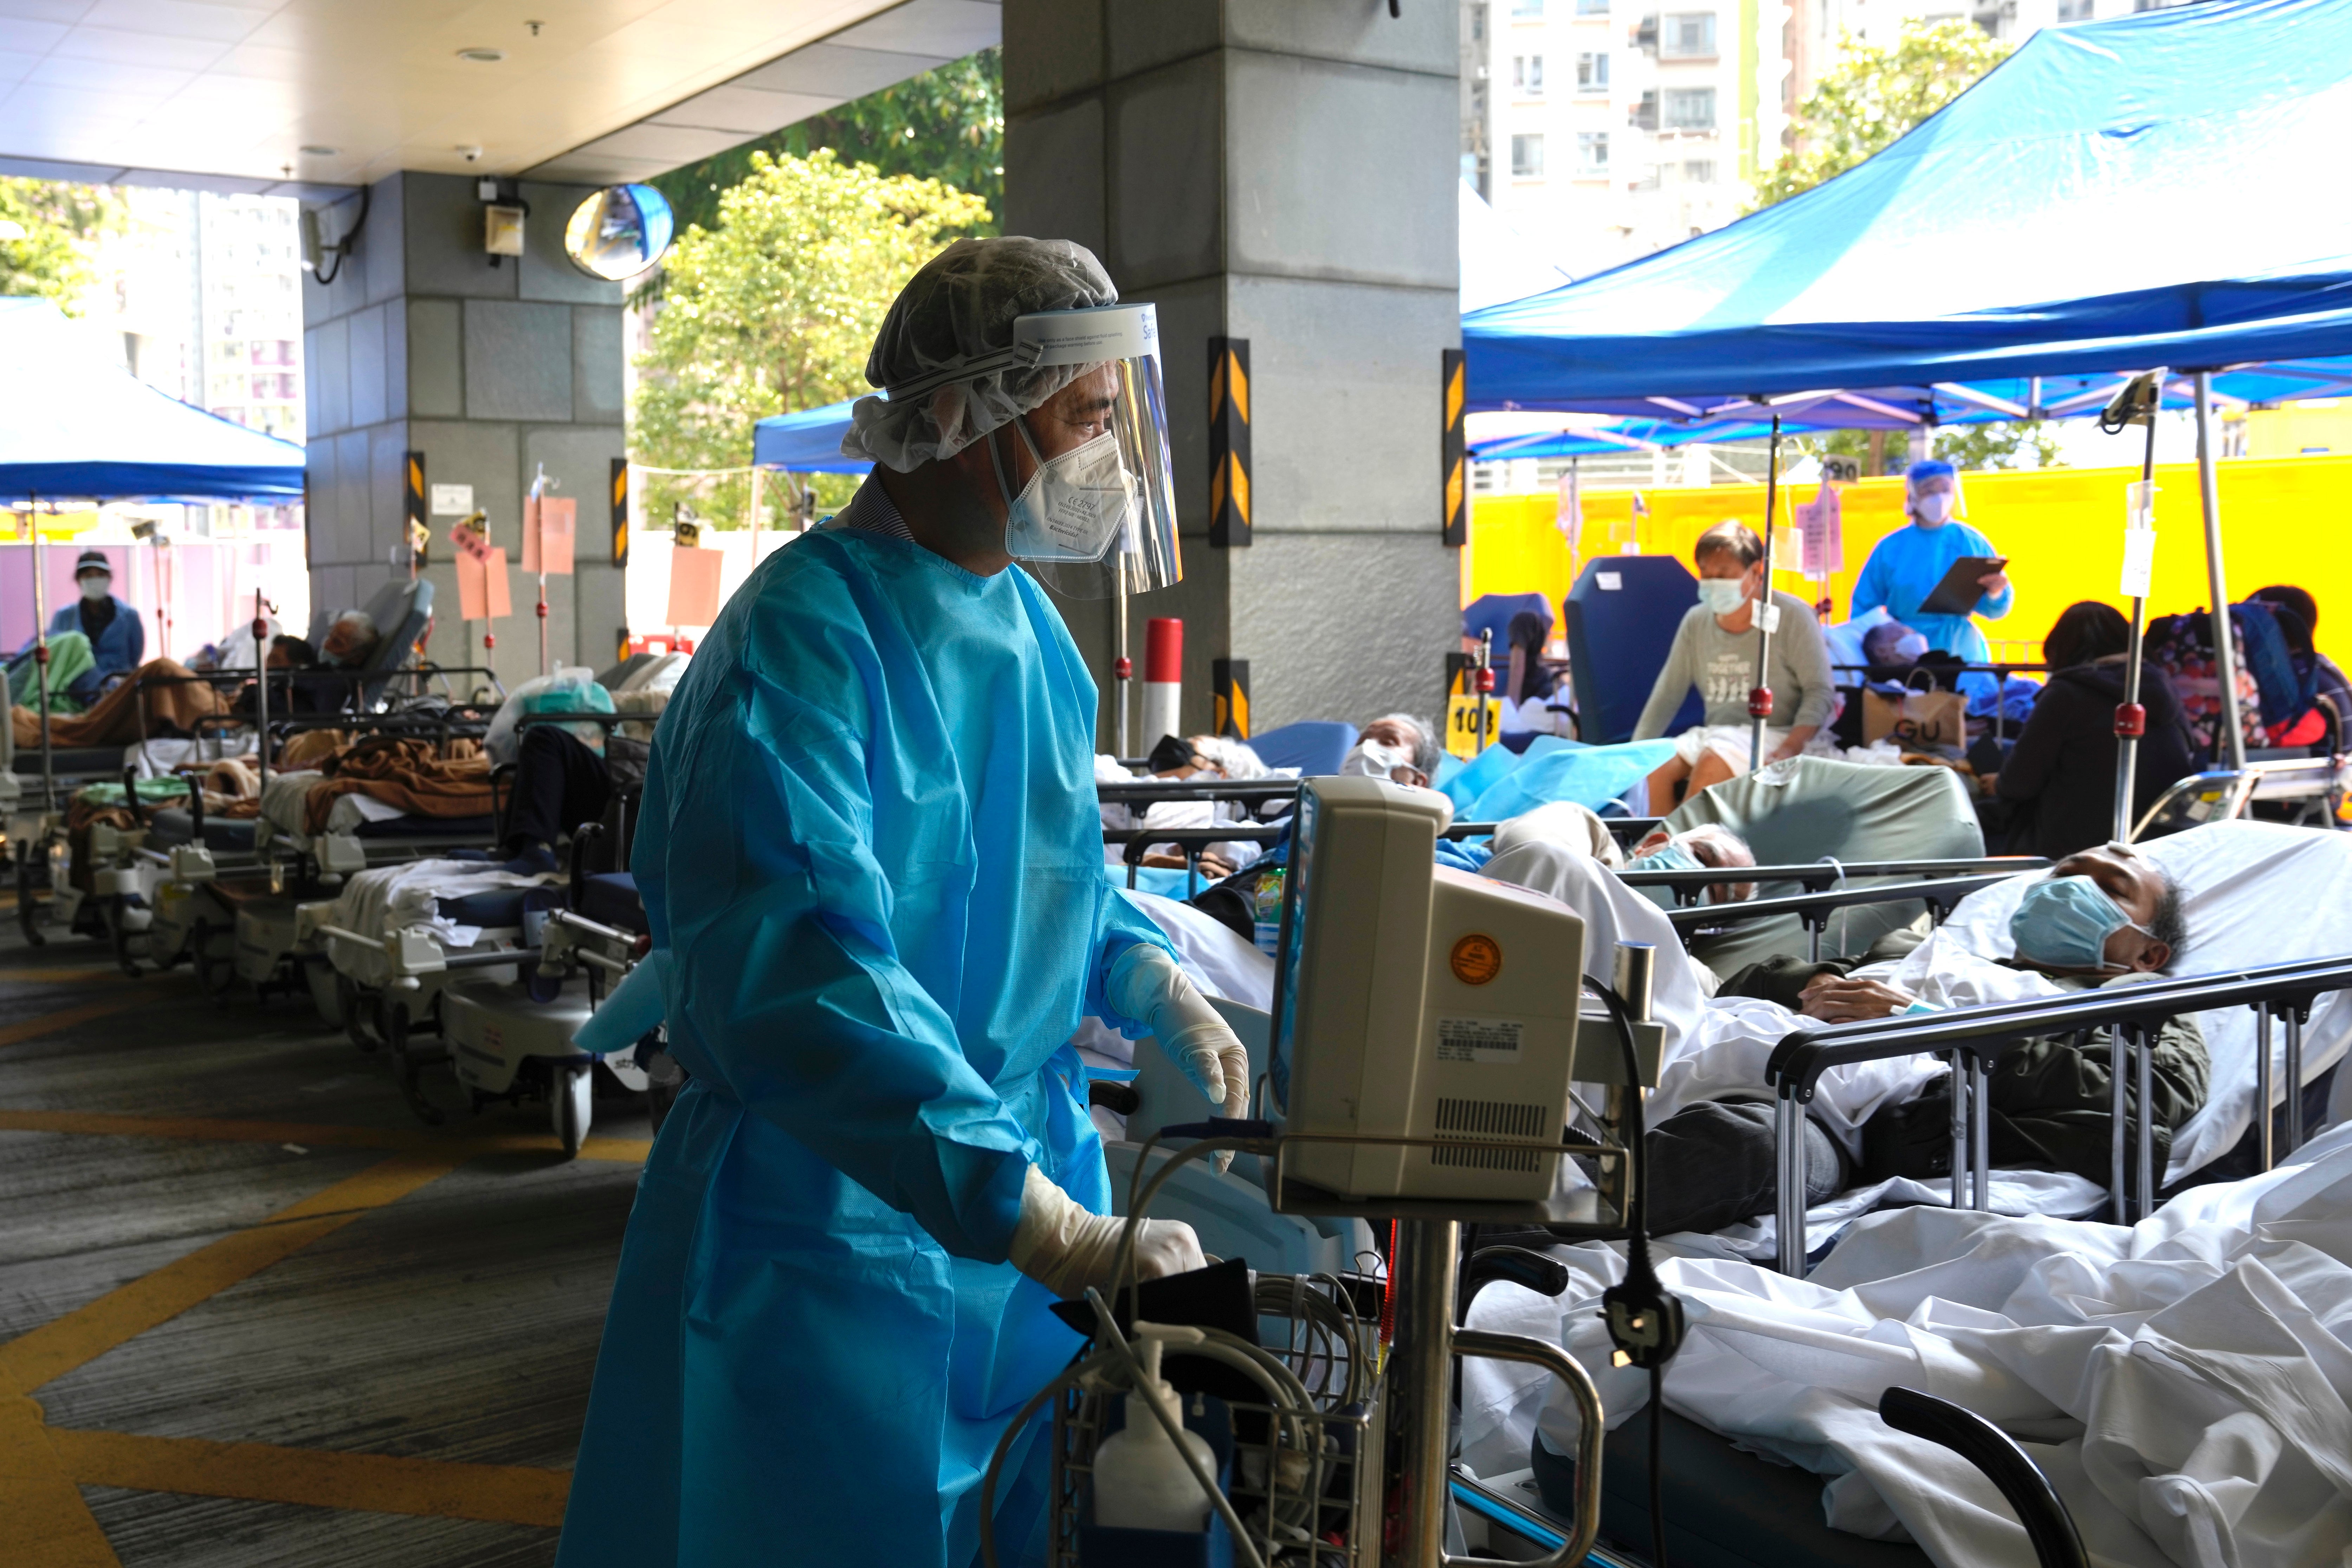 Patients in hospital beds wait in a temporary holding area outside Caritas Medical Centre in Hong Kong